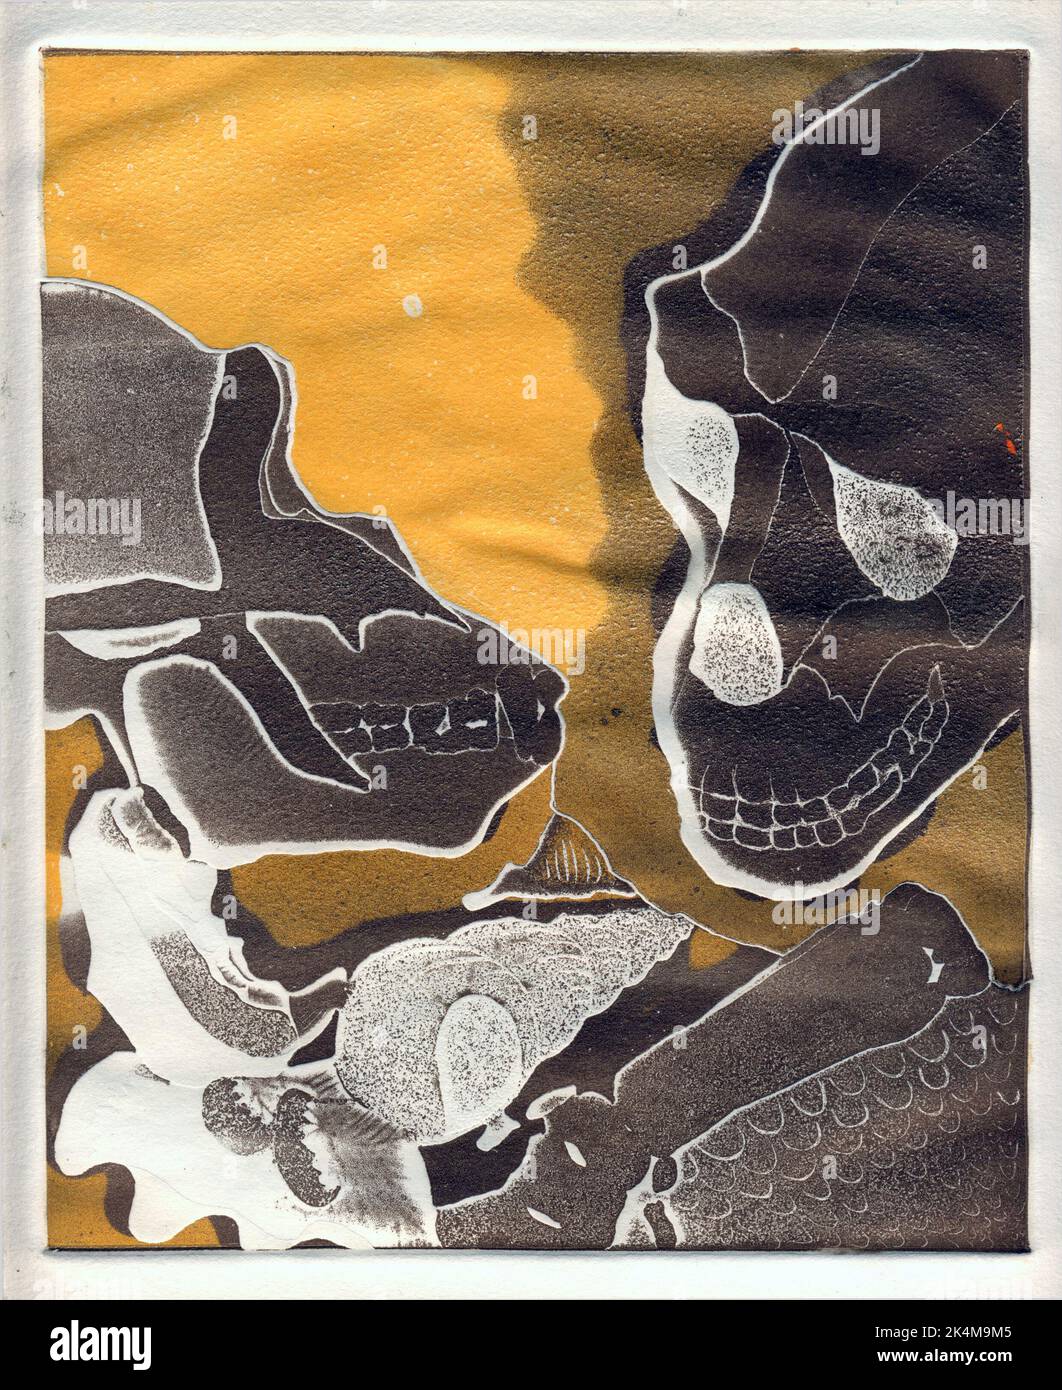 1 of 4 etchings showing two gorilla/ hominid skulls, suitable for book cover magazine editorial, evolution, biology, zoology, history, anthropology. Stock Photo